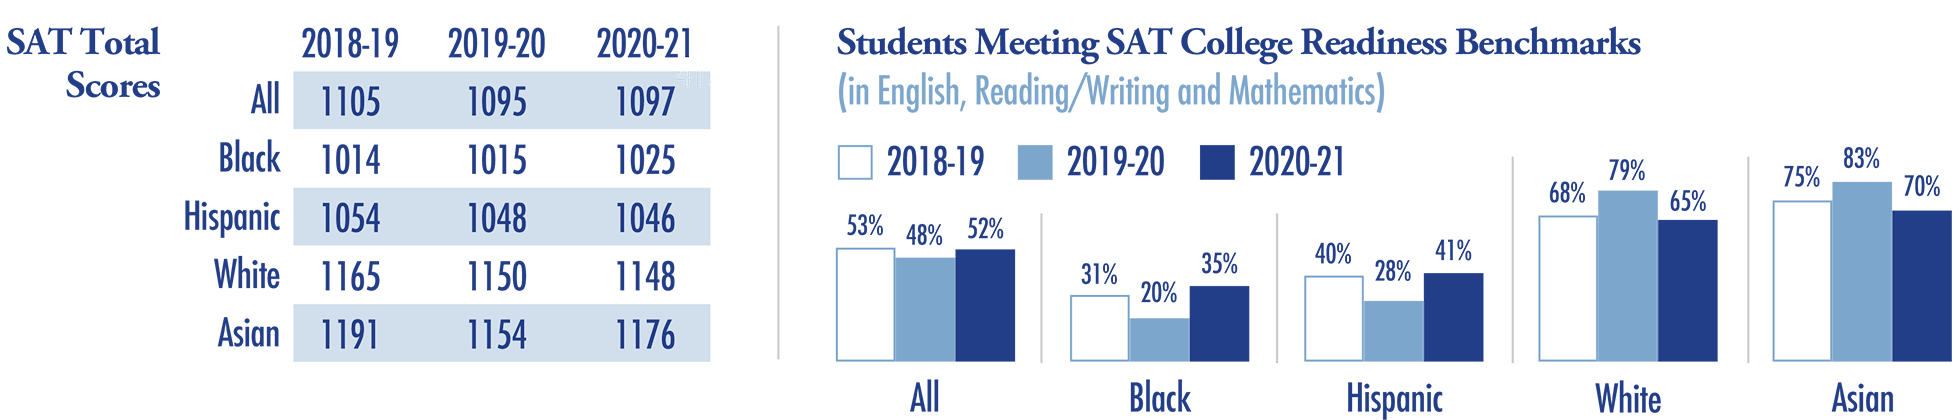 Chart of SAT total scores and students meeting SAT college readiness benchmarks by race and ethnicity